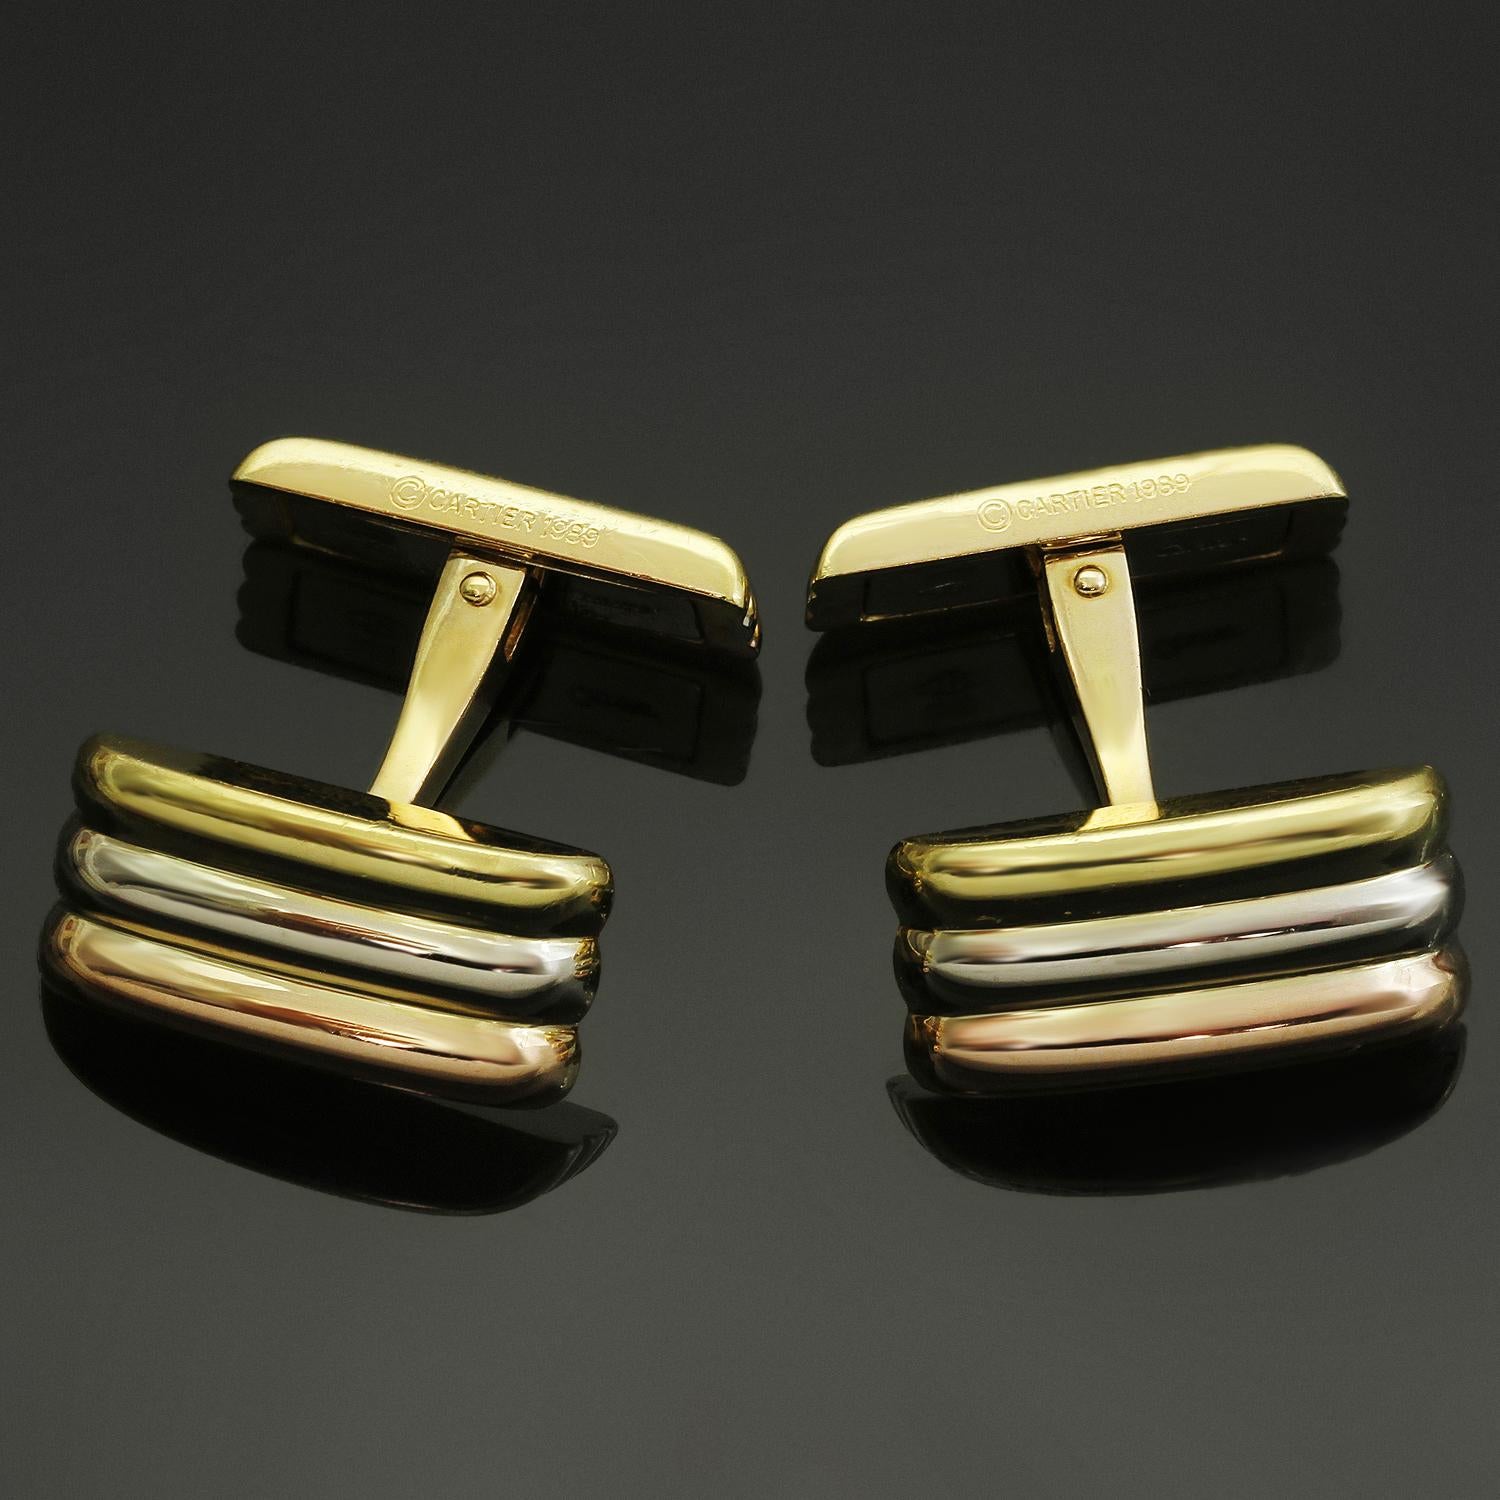 These elegant Cartier cufflinks from the iconic Trinity collection are crafted in 18k yellow, white, and rose gold. Made in France circa 1989. Measurements: 0.70